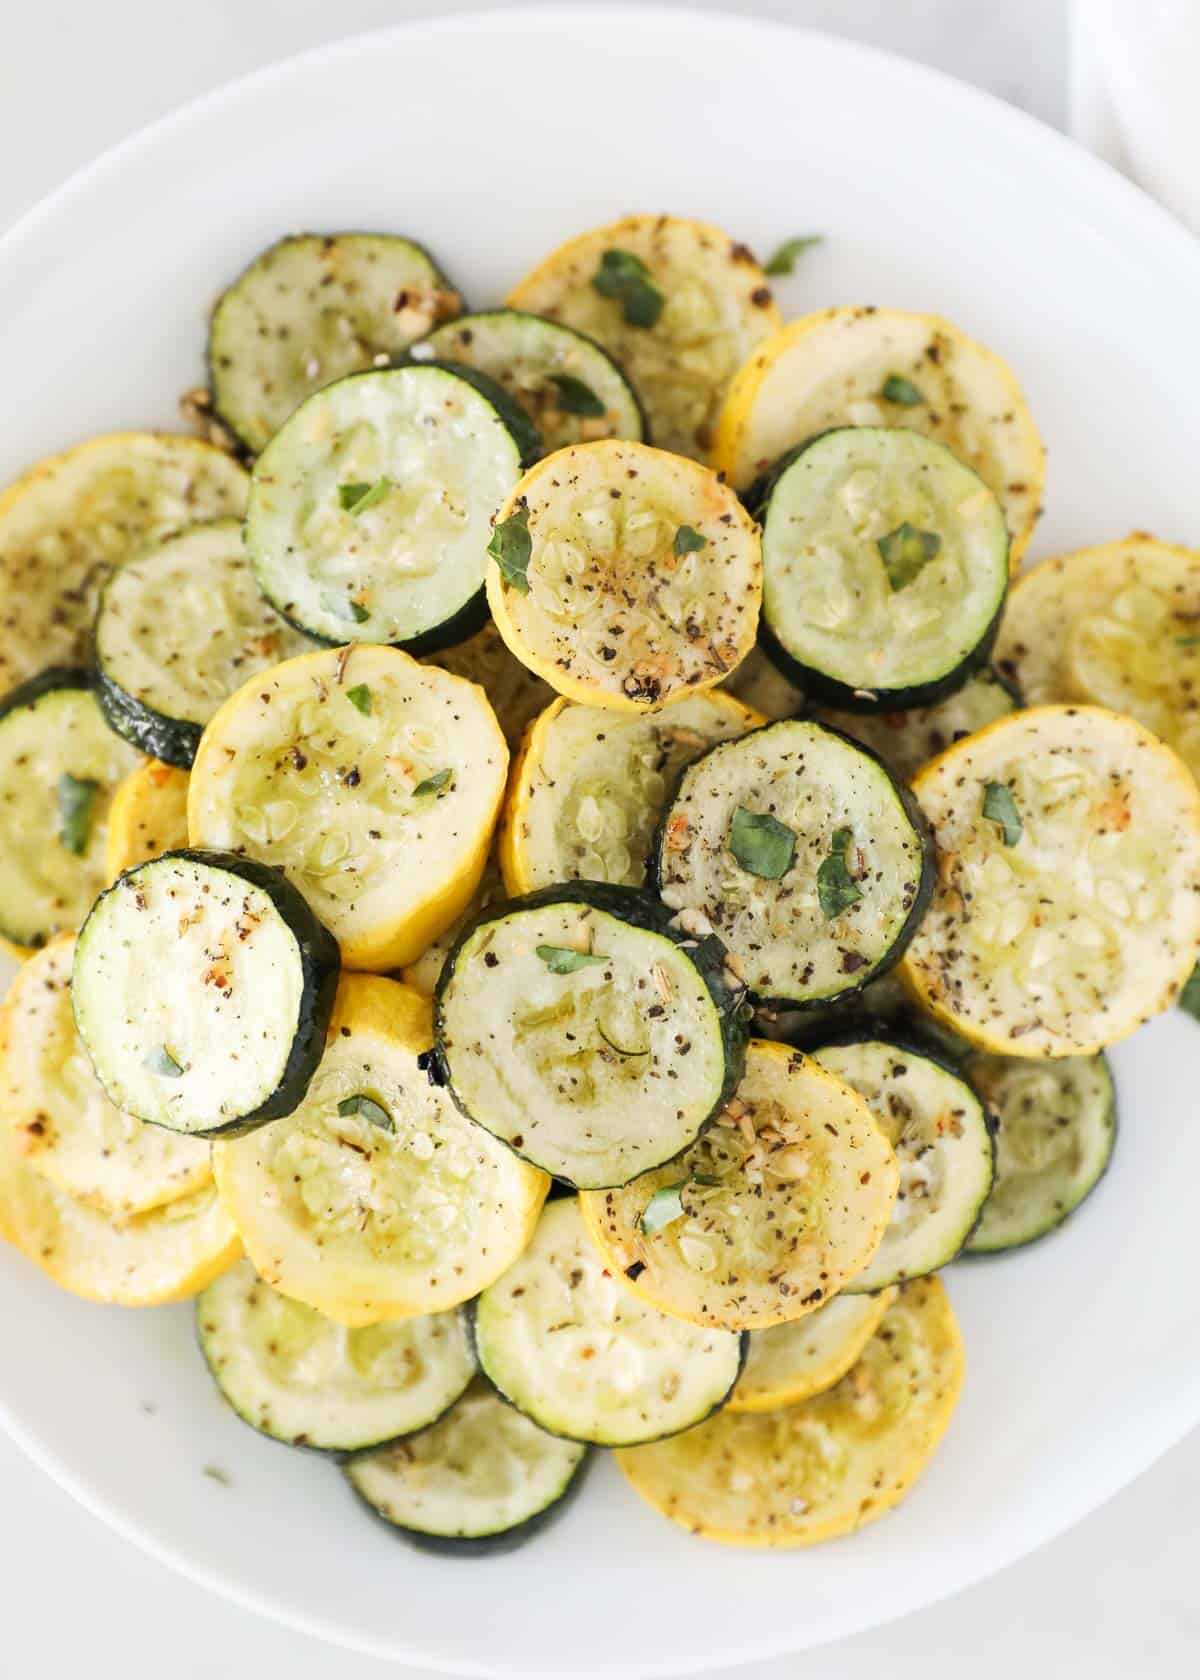 Roasted zucchini and squash on plate.